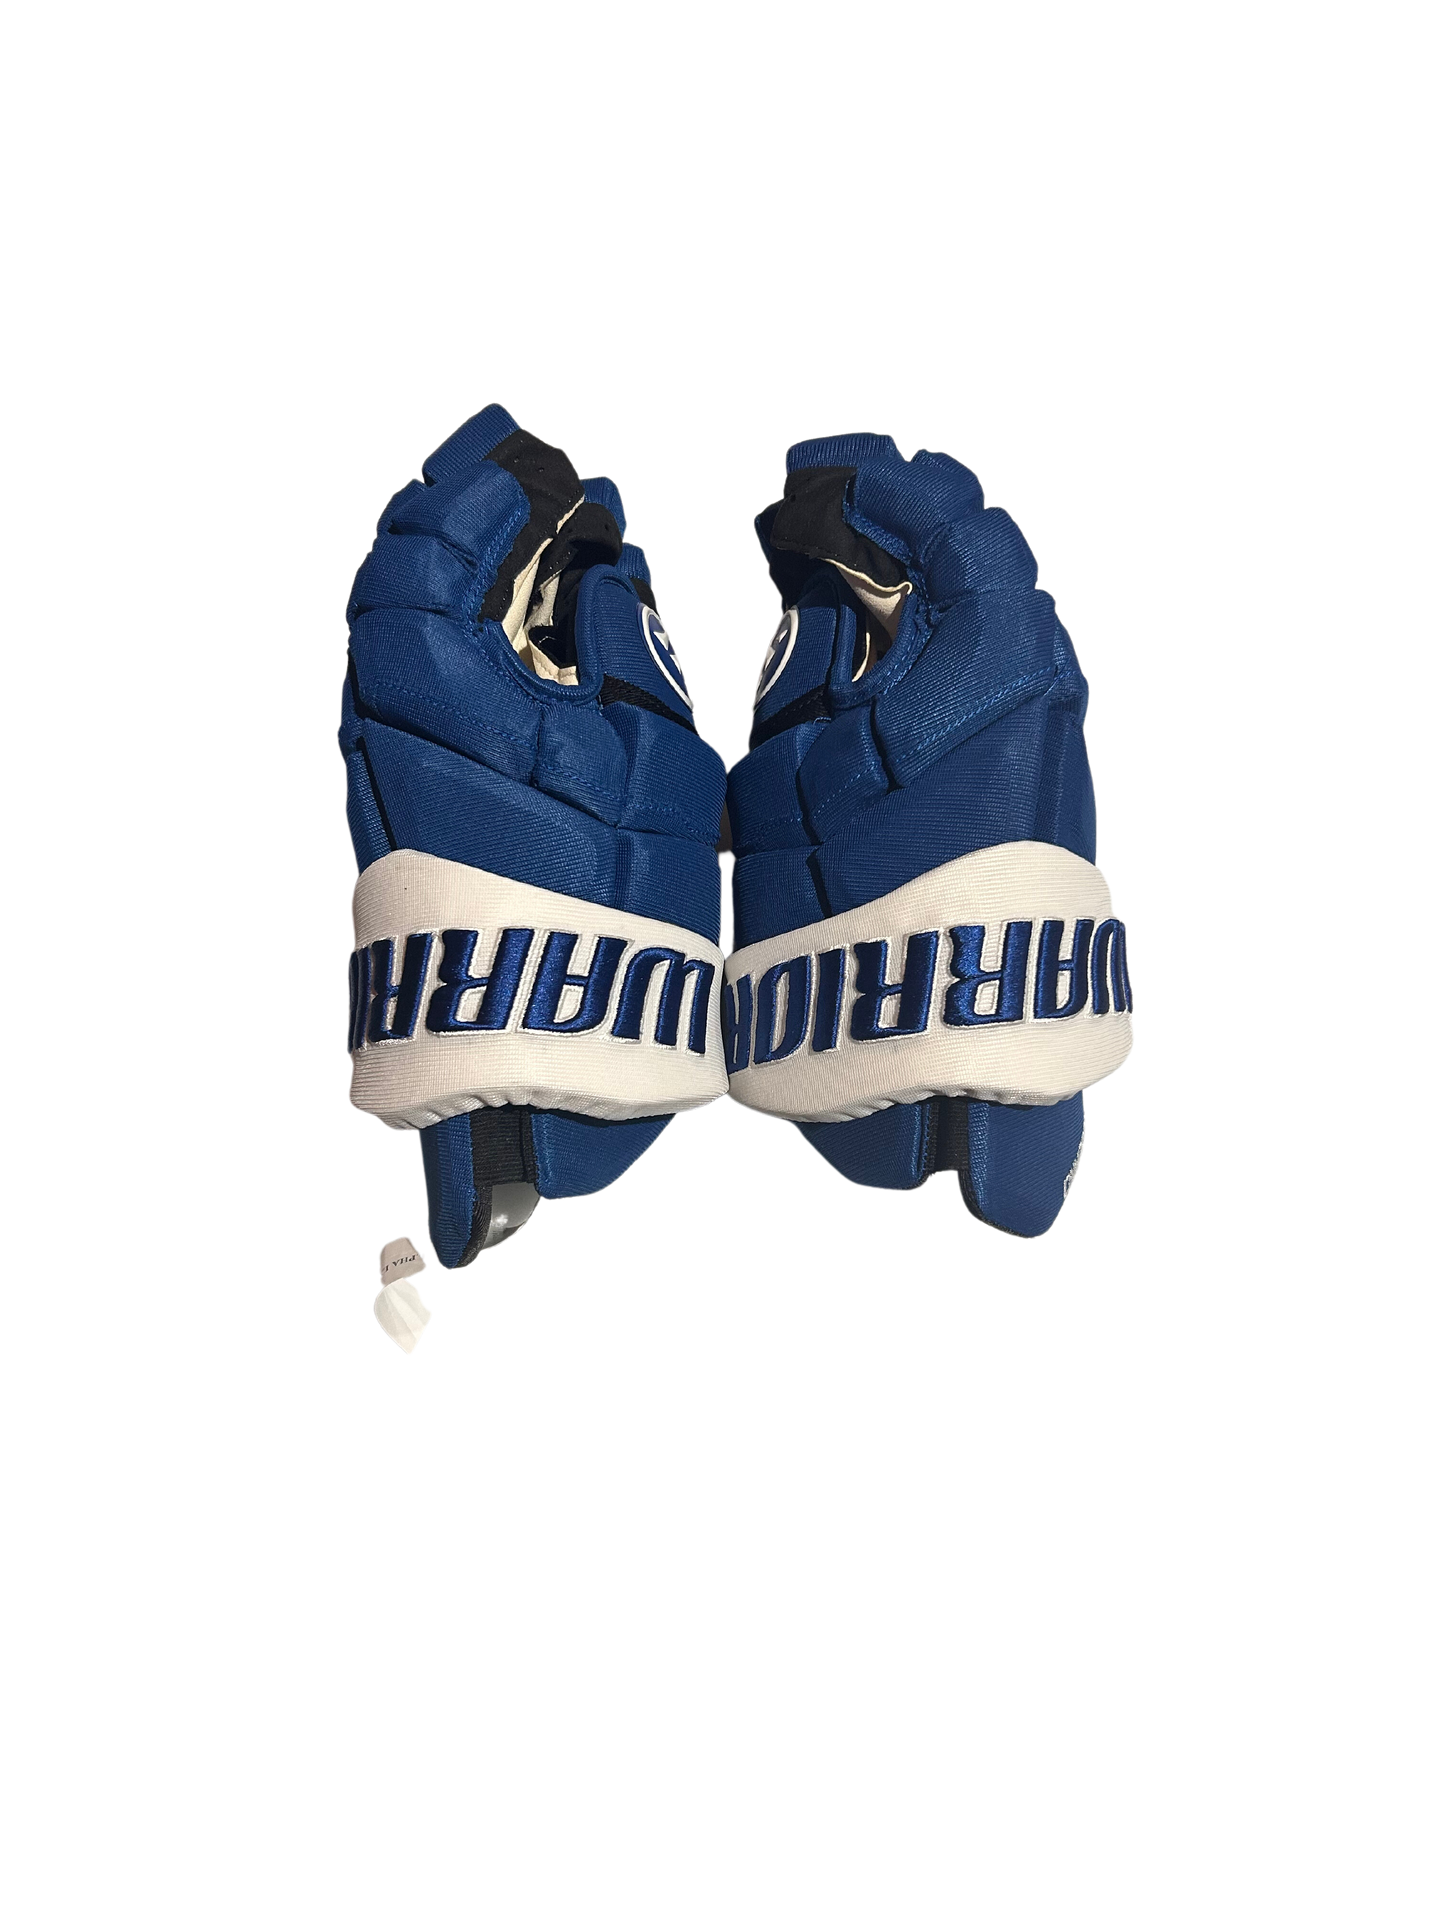 New Player Issued Blue Colorado Avalanche Warrior LX Pro Gloves (Multiple Sizes)